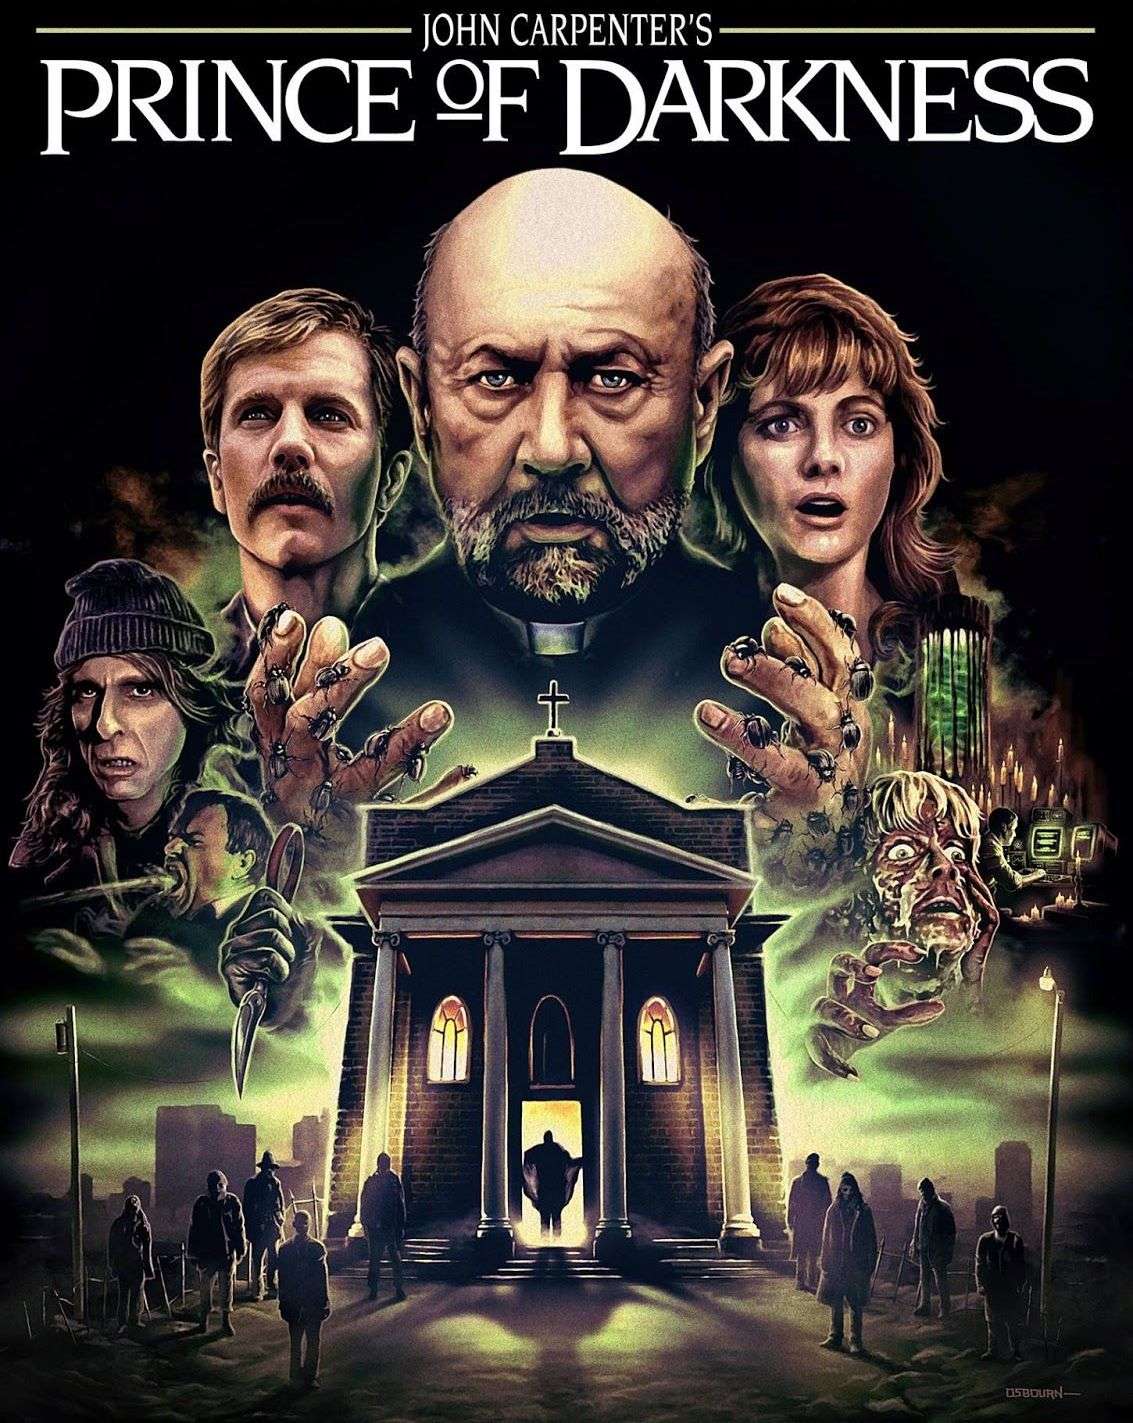 Let's Explore The 2nd Apocalypse Trilogy Movie - Prince Of Darkness (1987)